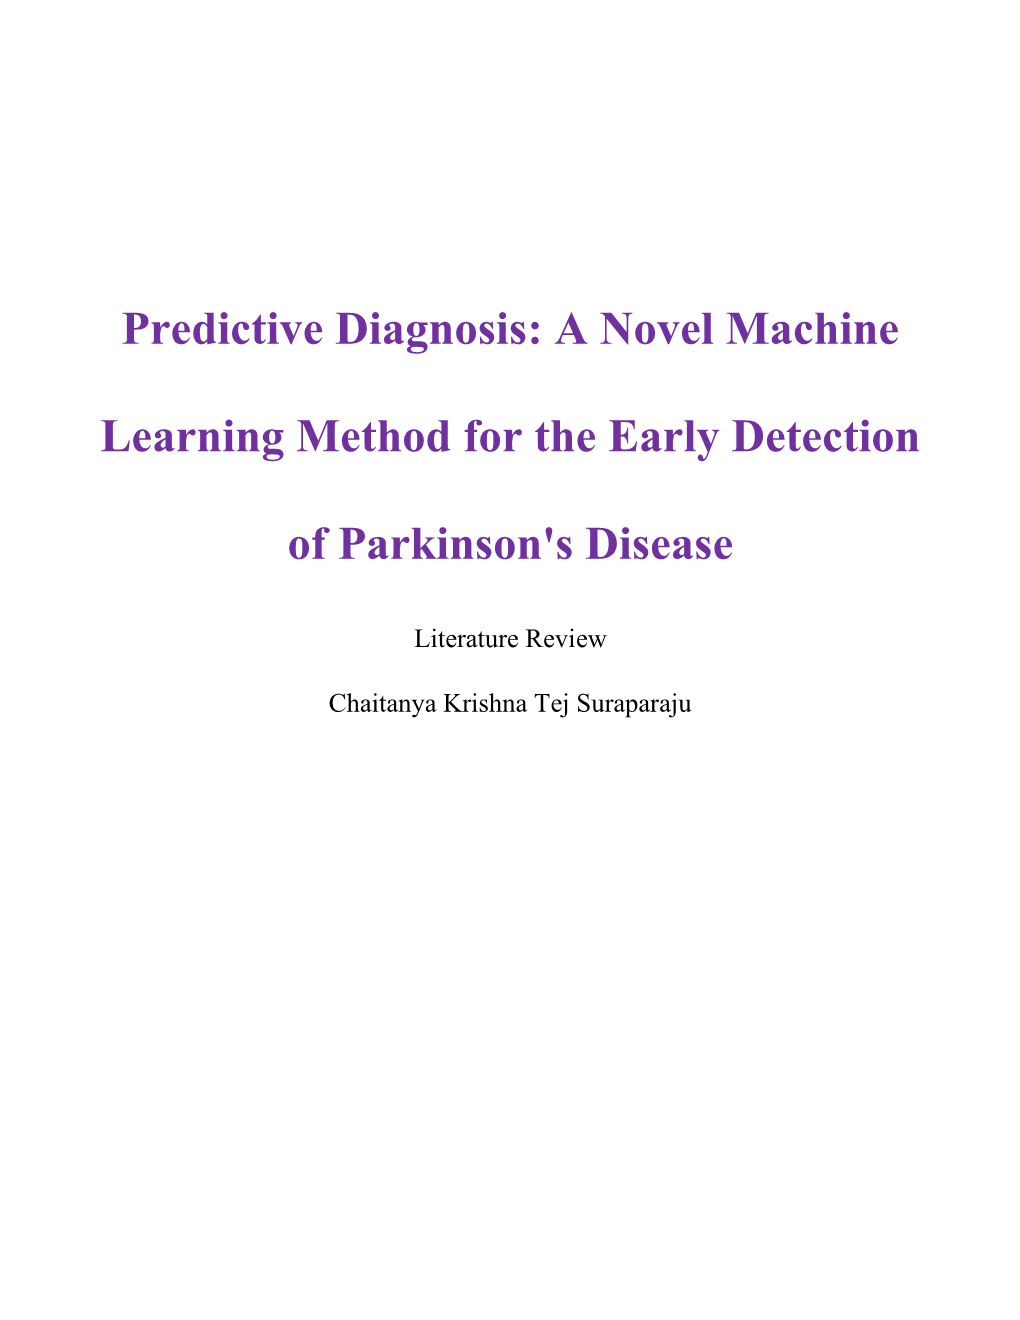 A Novel Machine Learning Method for the Early Detection Of